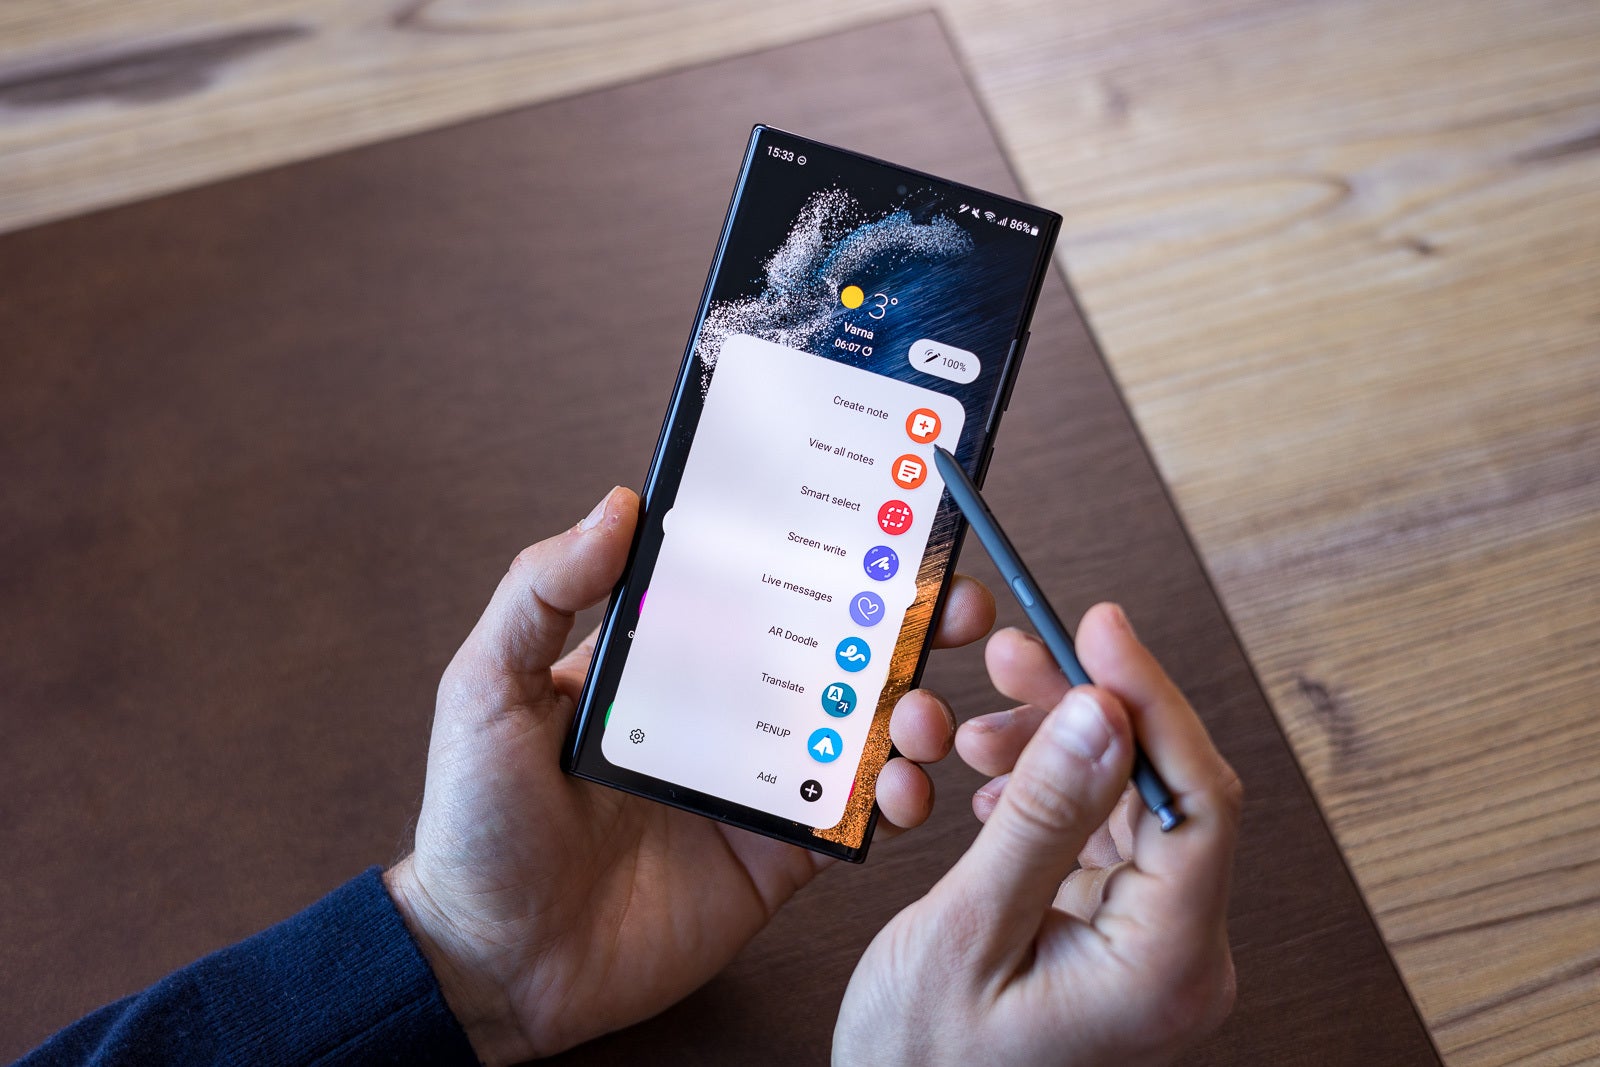 The S22 Ultra (shown here) and the upcoming S23 Ultra offer a built-in stylus, and plenty of software features for it - How the Galaxy S23 Ultra will break my vicious iPhone cycle (and why it's so difficult to stop using Apple's phones in favor of Android)